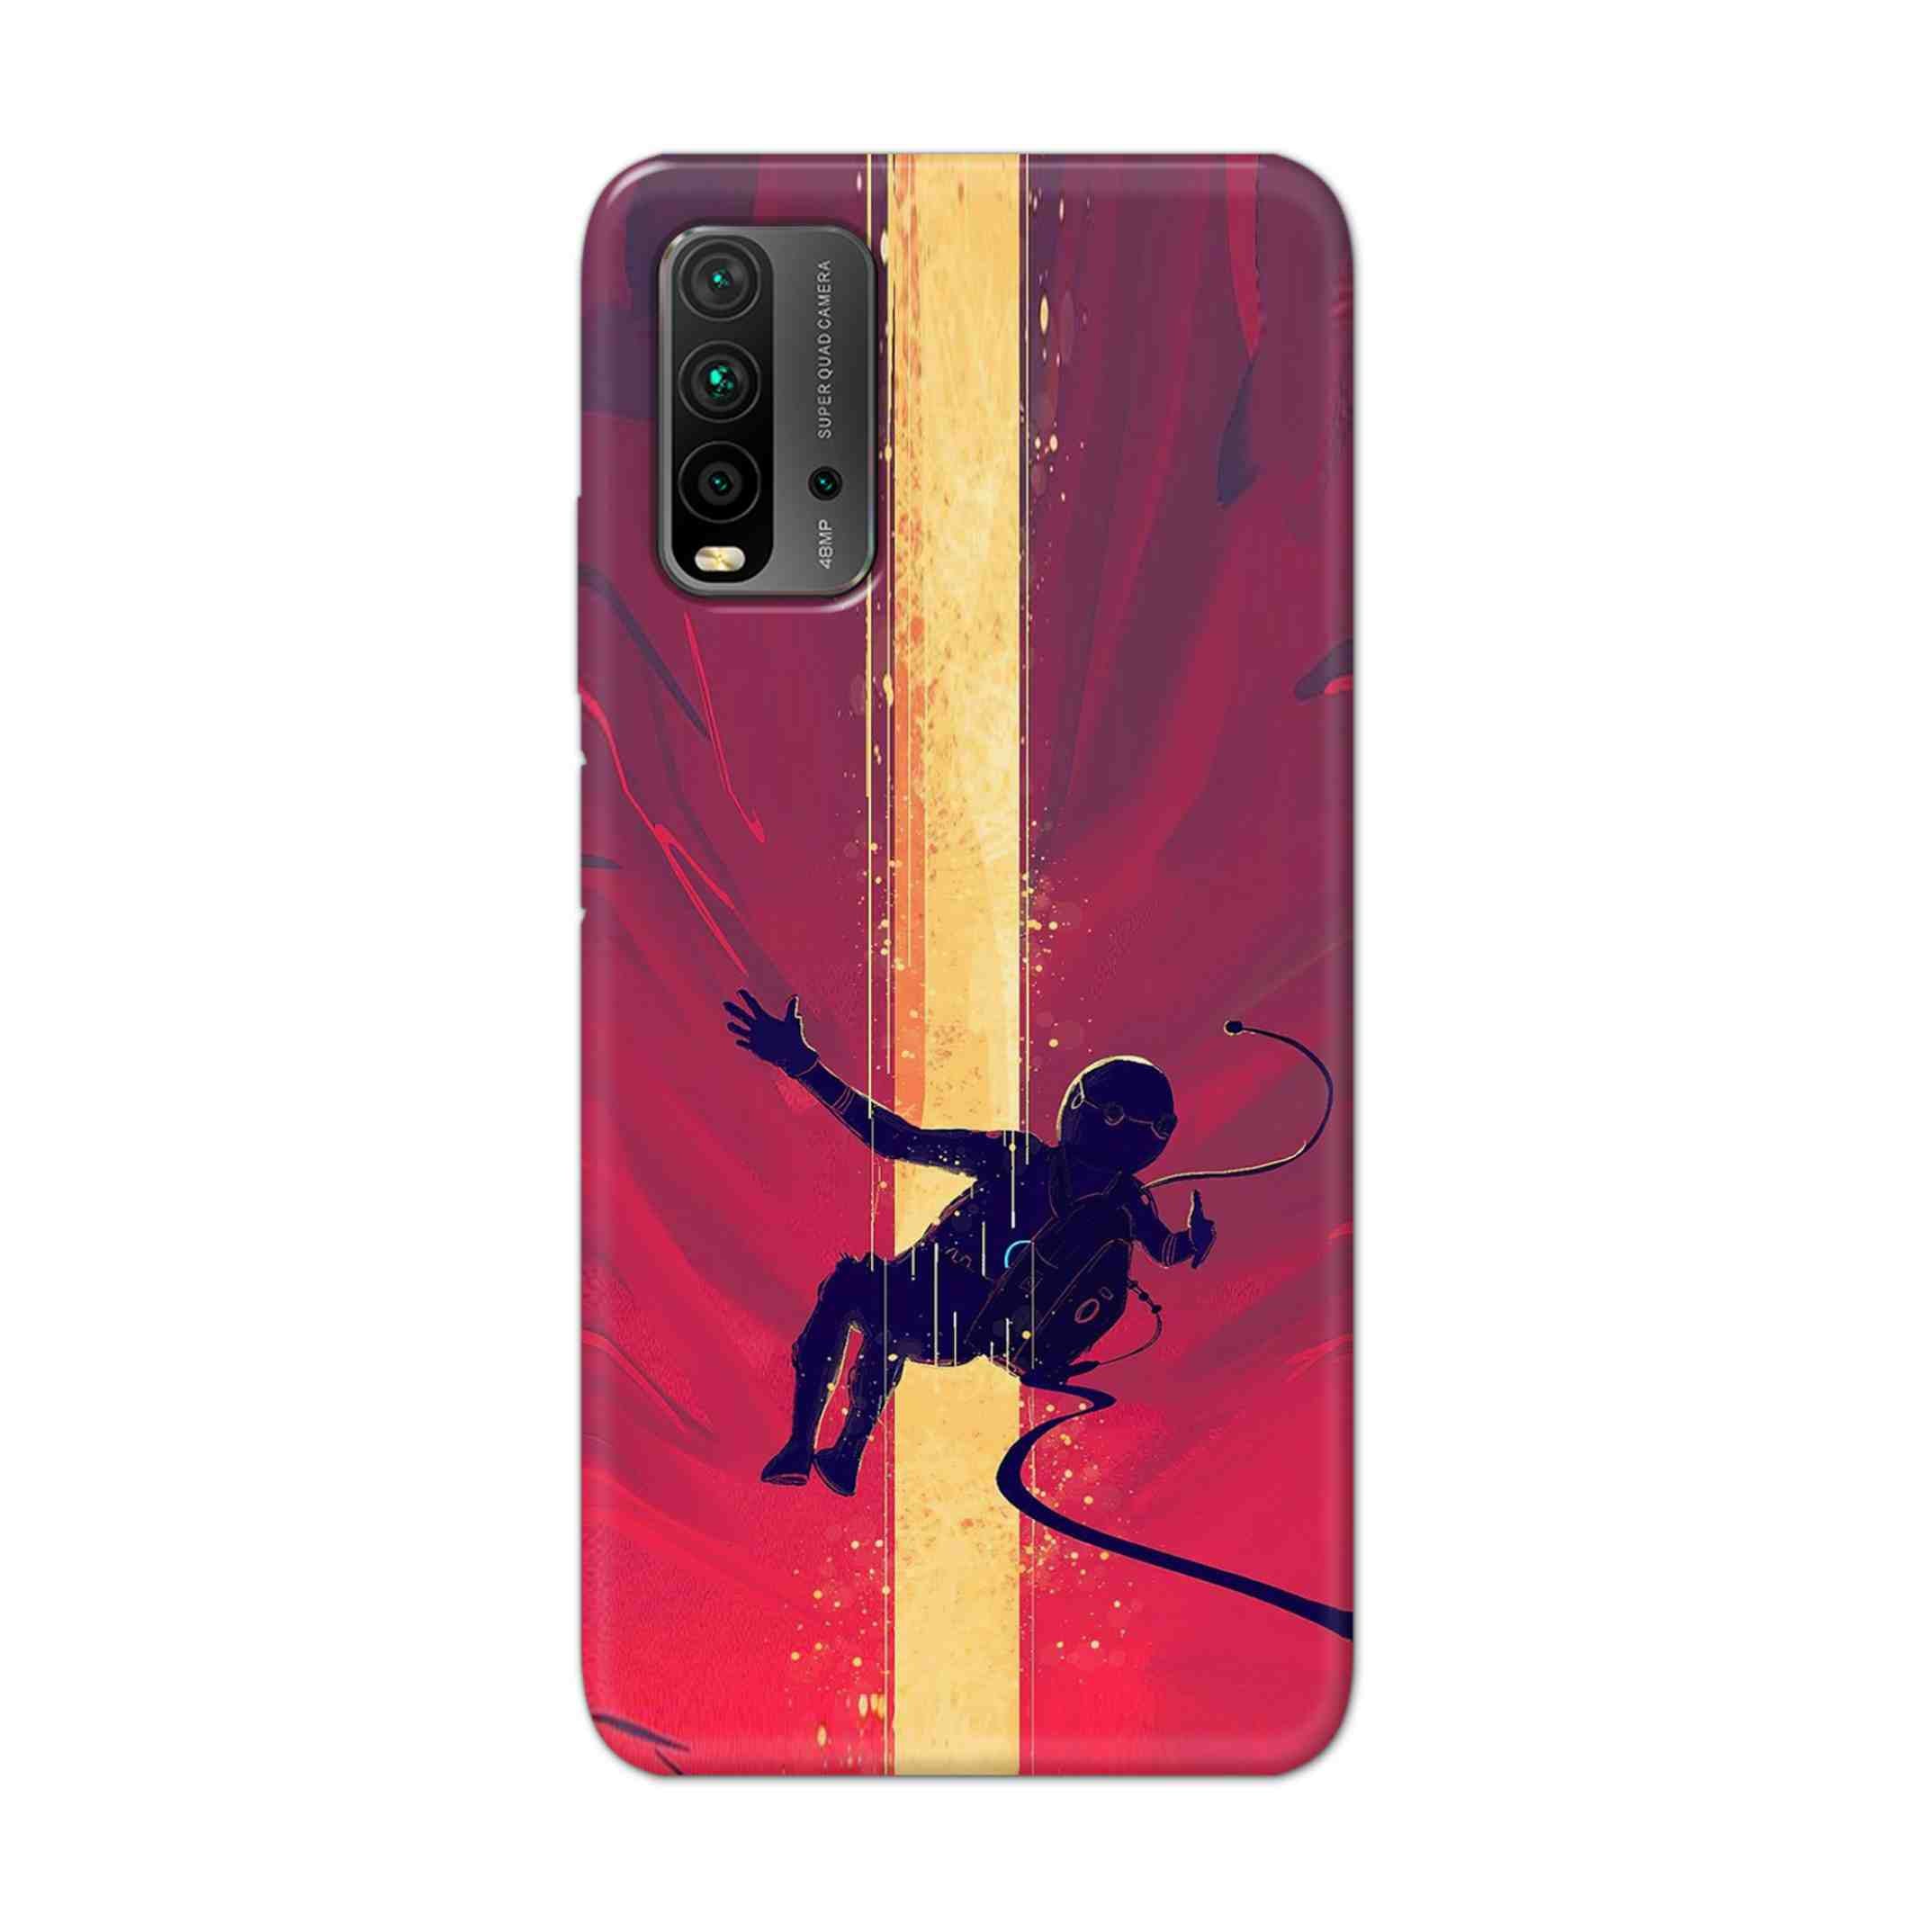 Buy Astronaut In Air Hard Back Mobile Phone Case Cover For Redmi 9 Power Online